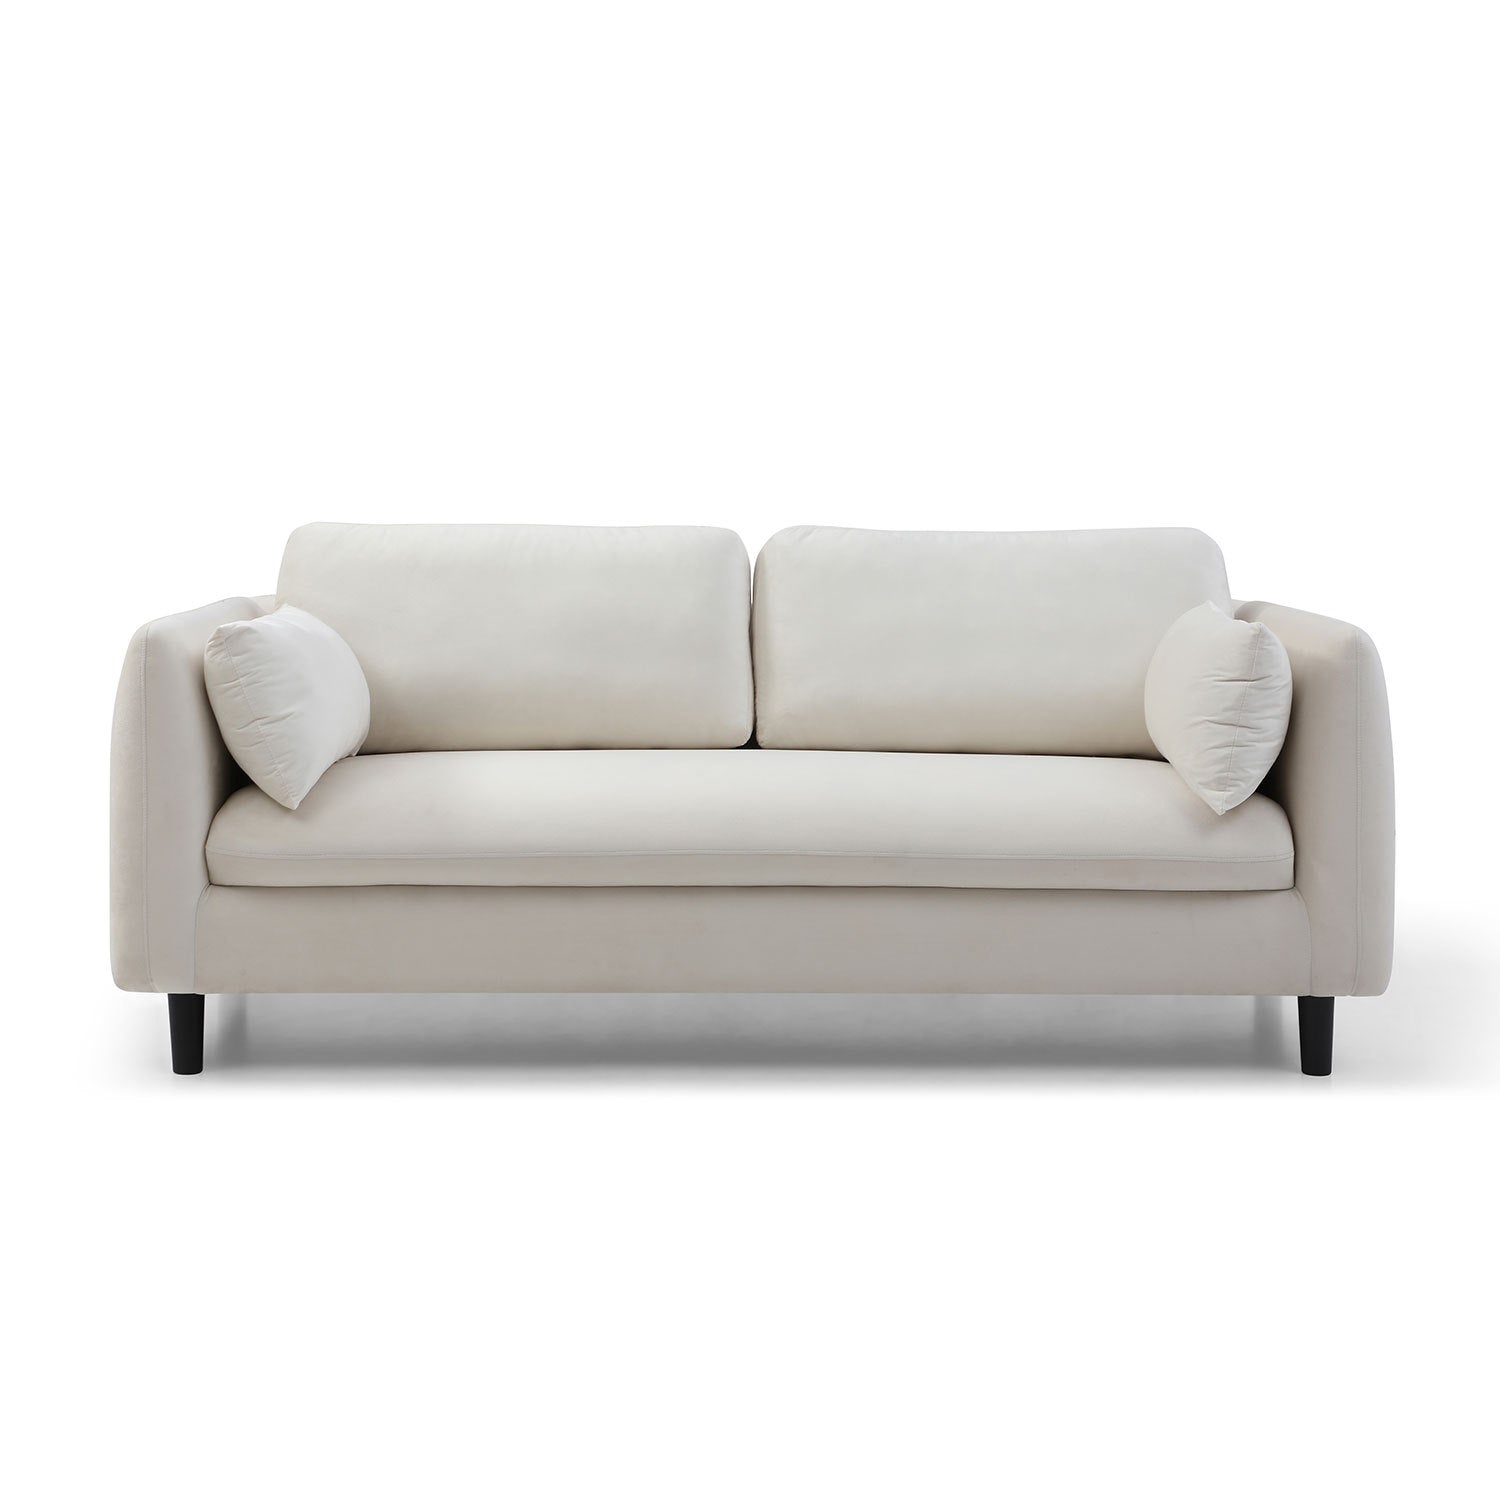 Pillowed Back Cushions and Rounded Arms, Durable beige-fabric